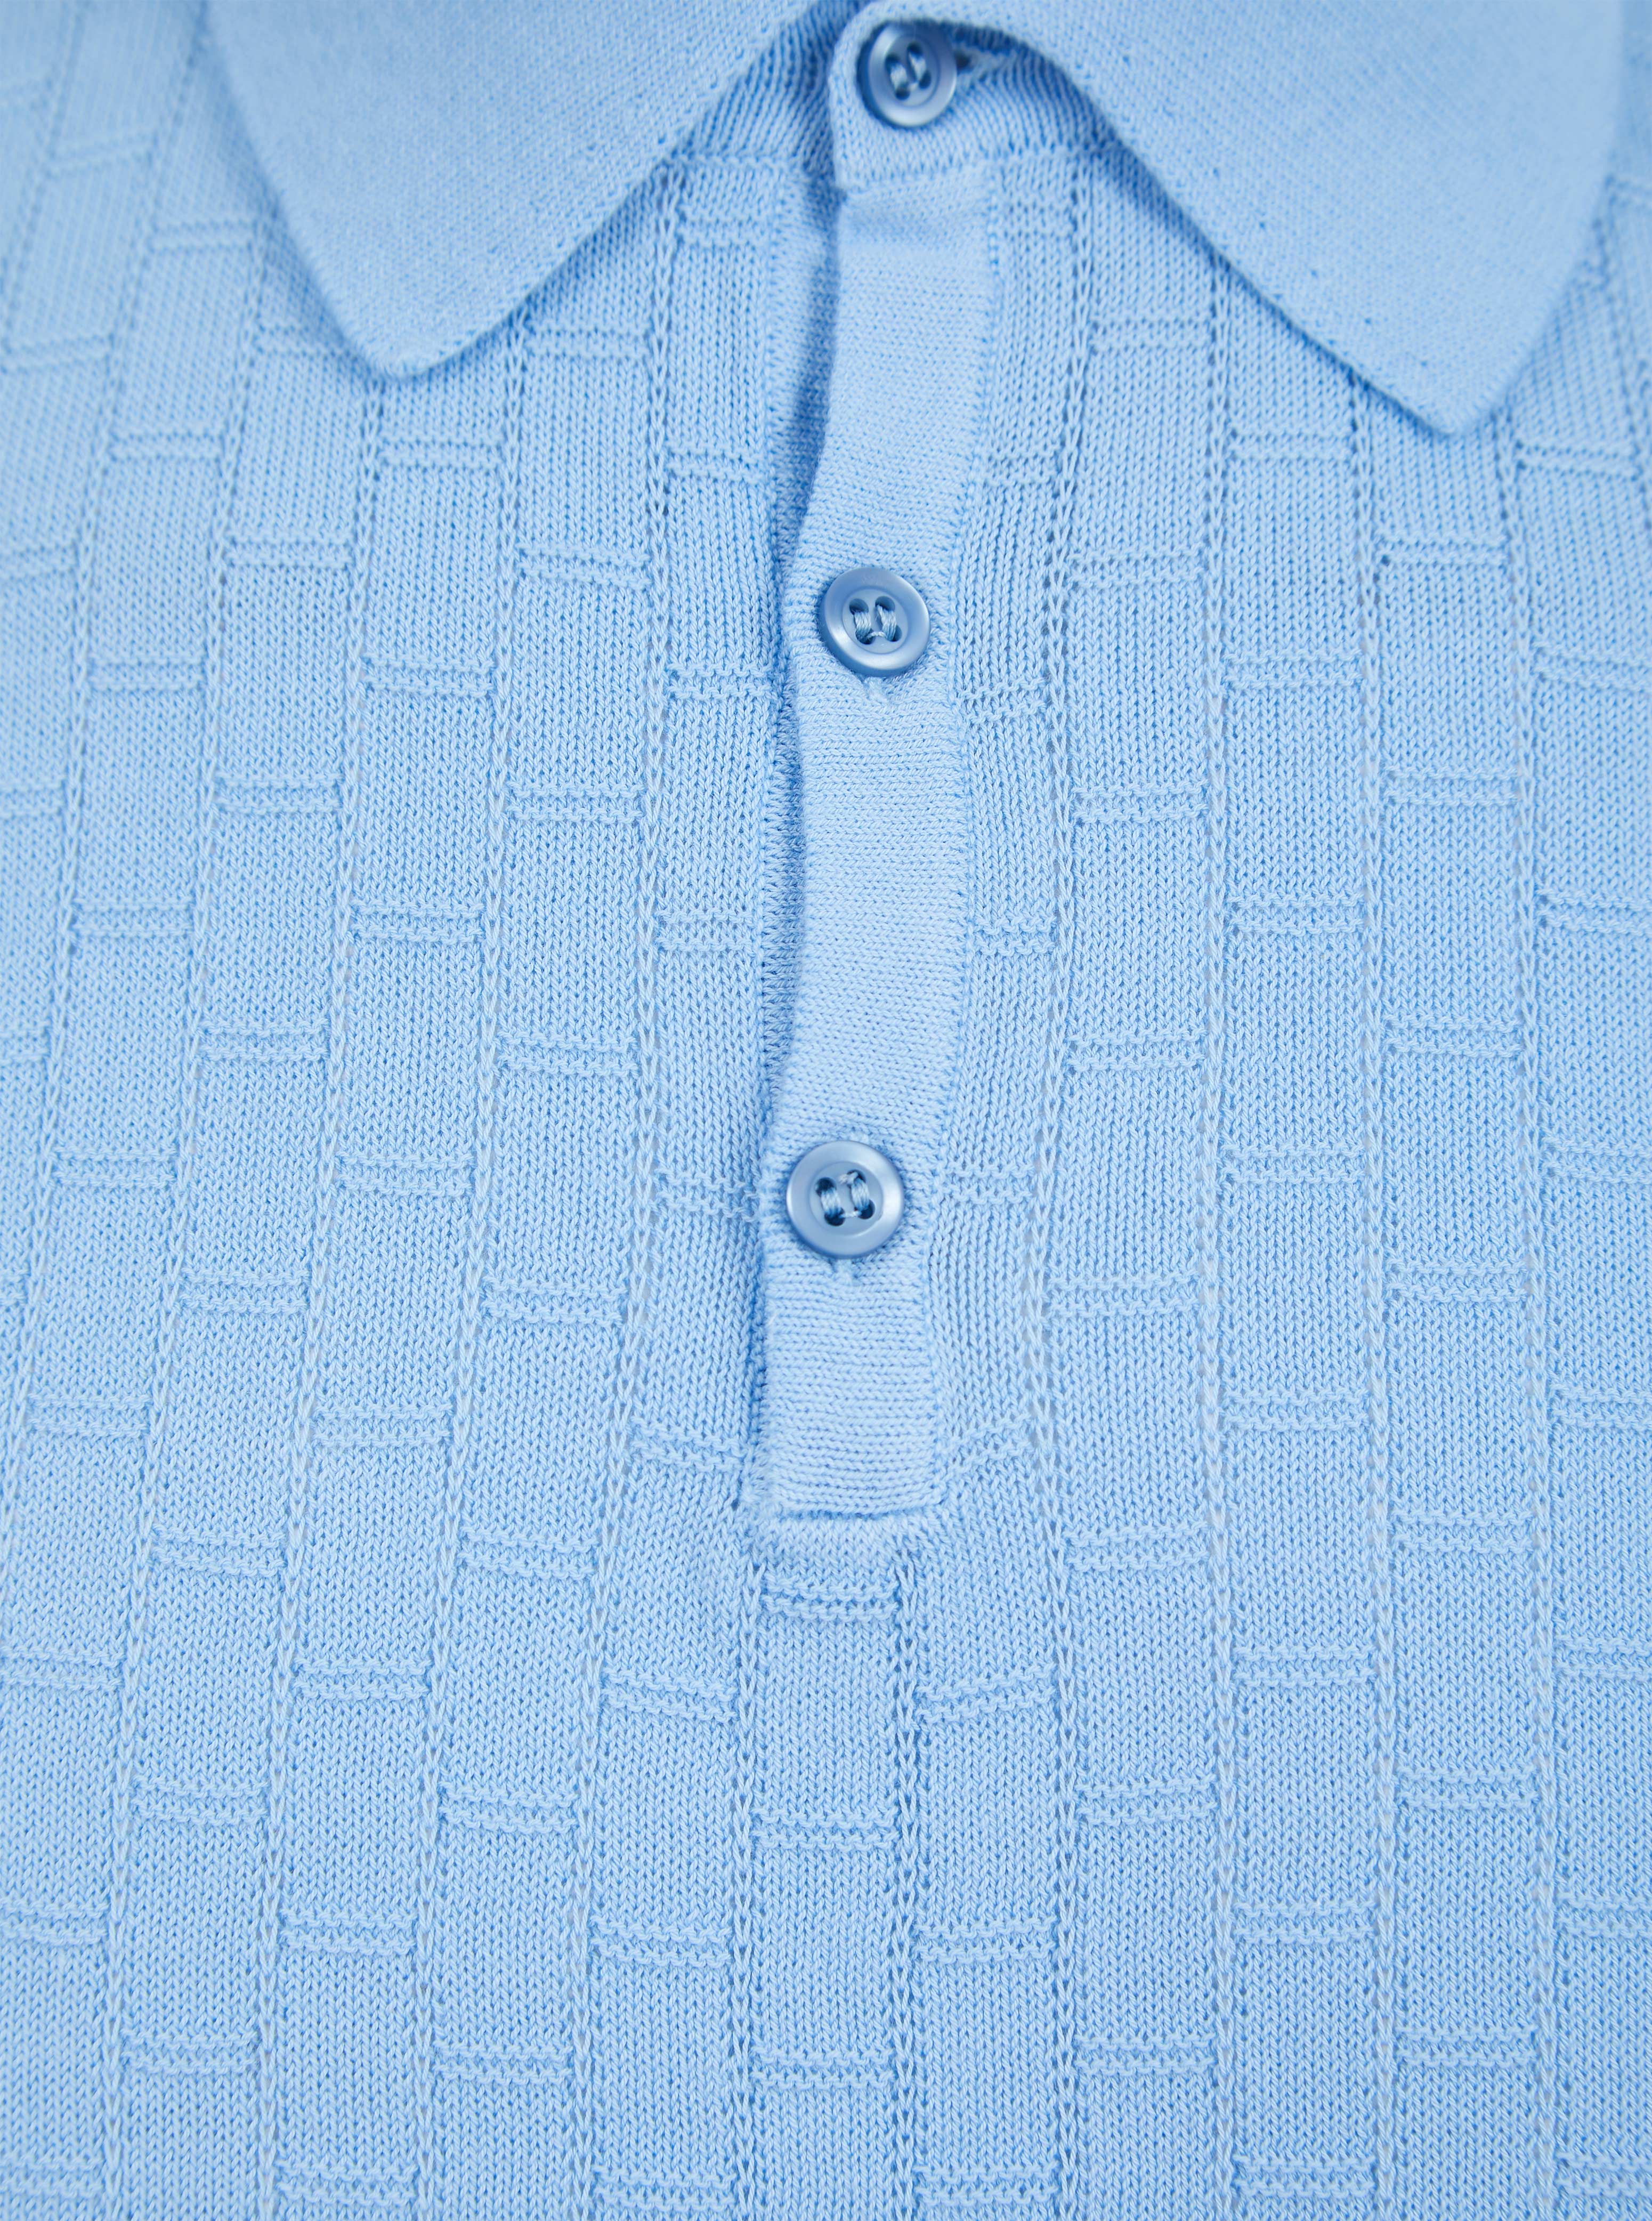 Load image into Gallery viewer, IL Telaio Weave Knit Polo Sky
